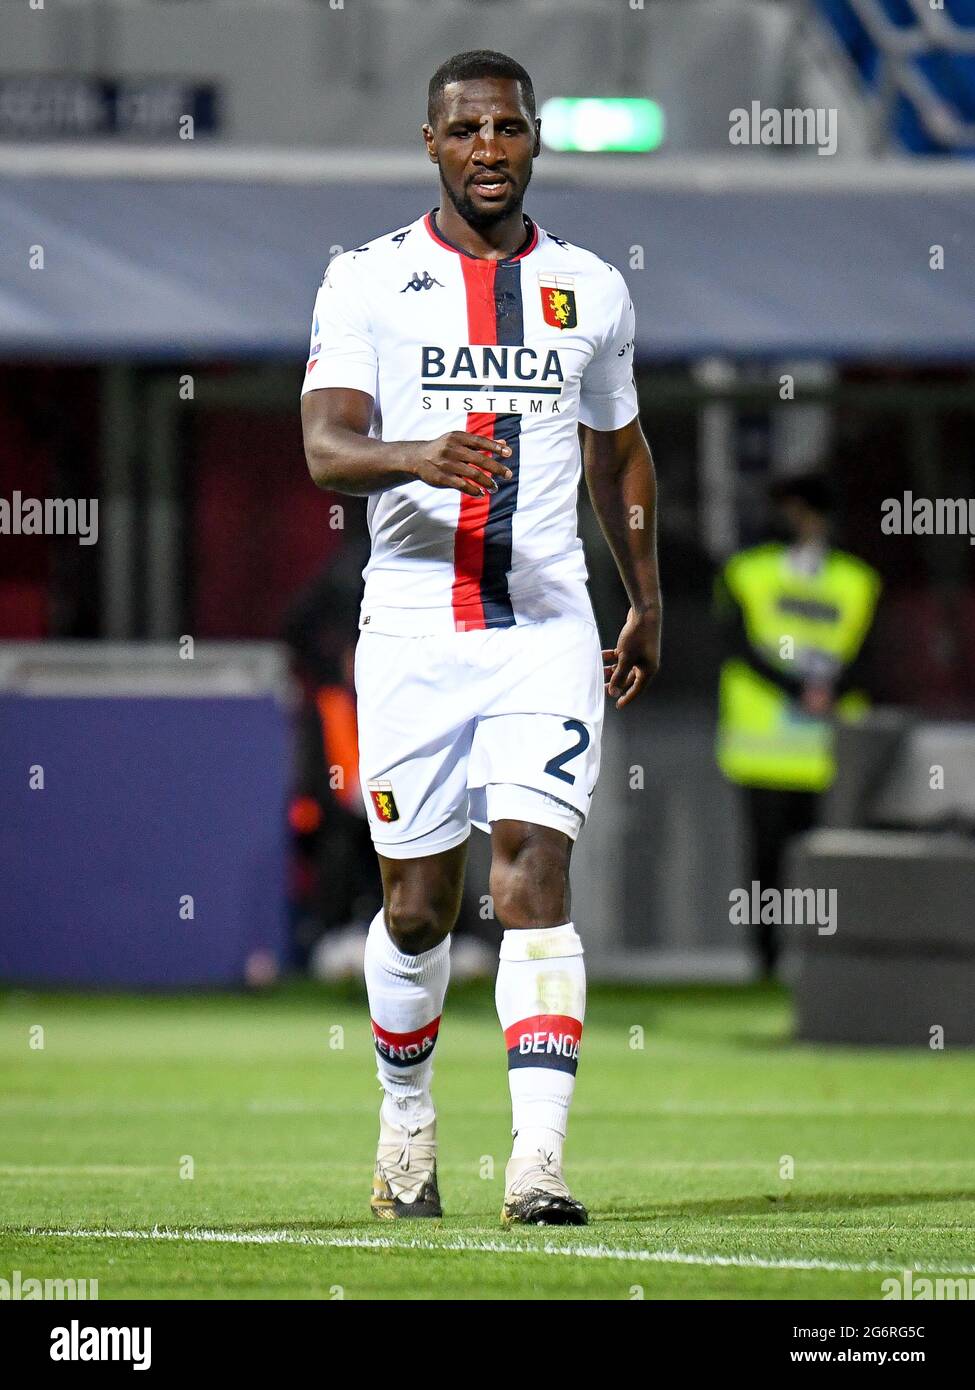 Bologna, Italy. 01st June, 2021. Cristian Zapata (Genoa) portrait during Genoa CFC season 2020/2021 (Archives), Italian football Serie A match in Bologna, Italy, June 01 2021 Credit: Independent Photo Agency/Alamy Live News Stock Photo